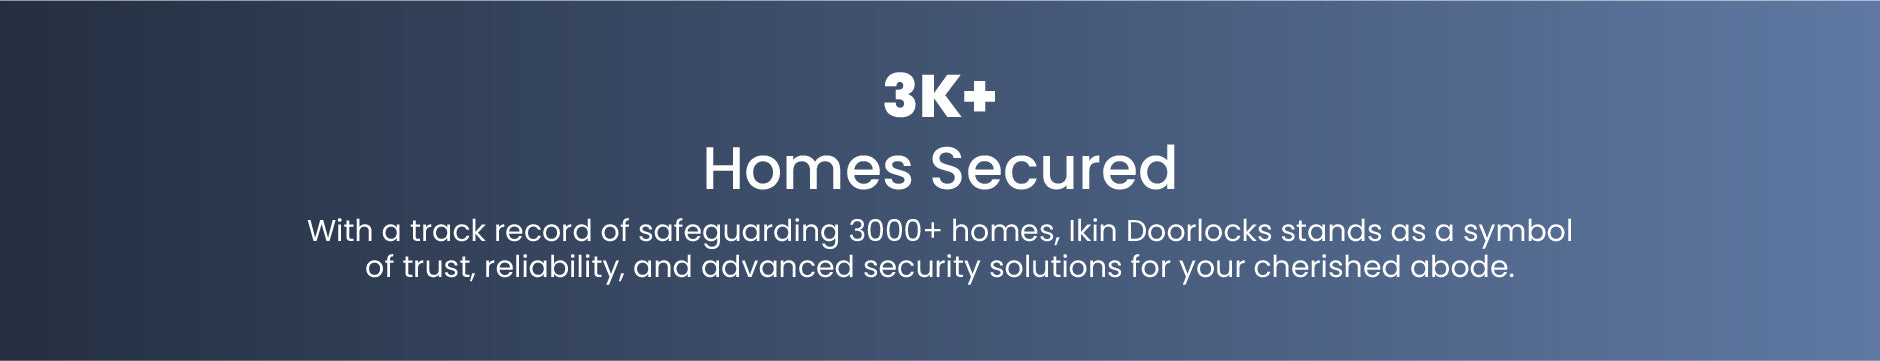 IKIN Home Page - 3000 Homes Secured